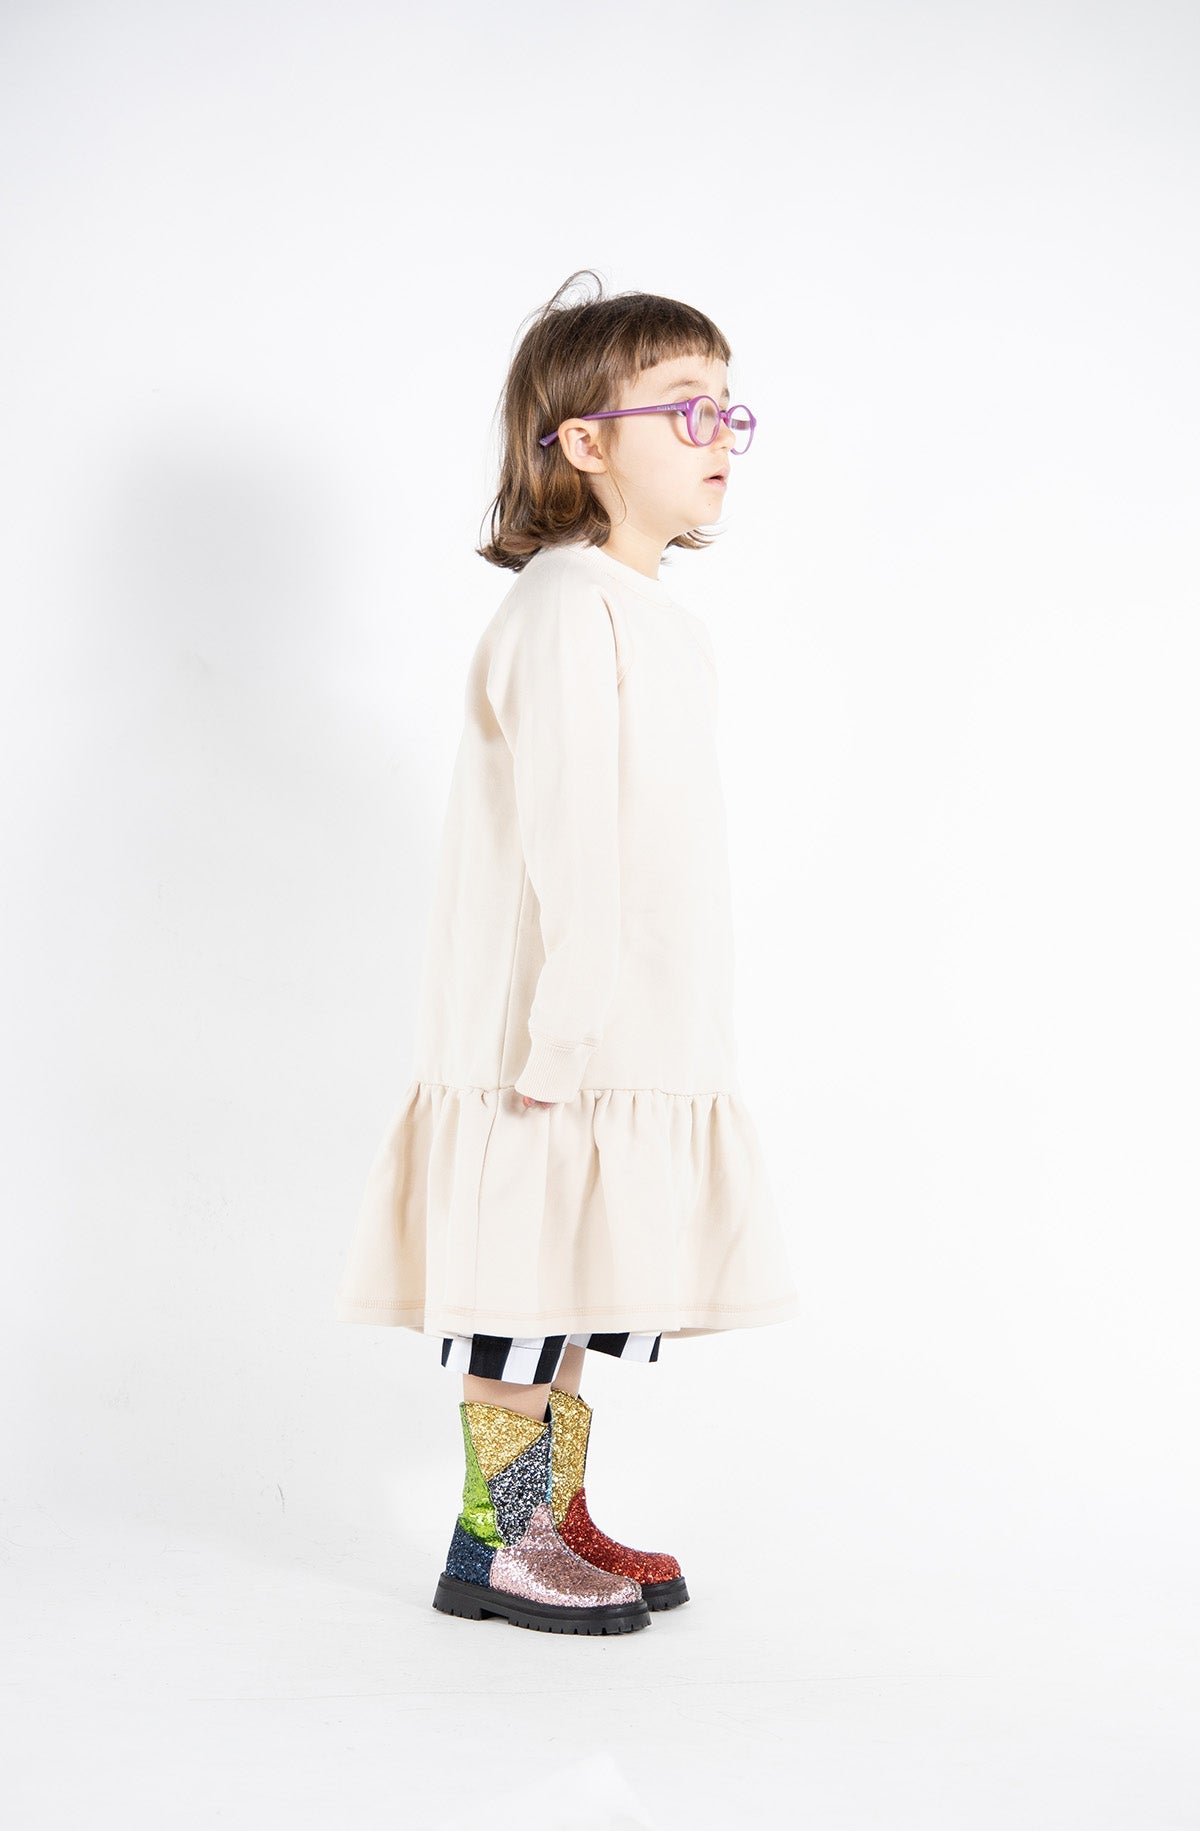 CREW NECK GATHERED DRESS IN OFF WHITE ma kids